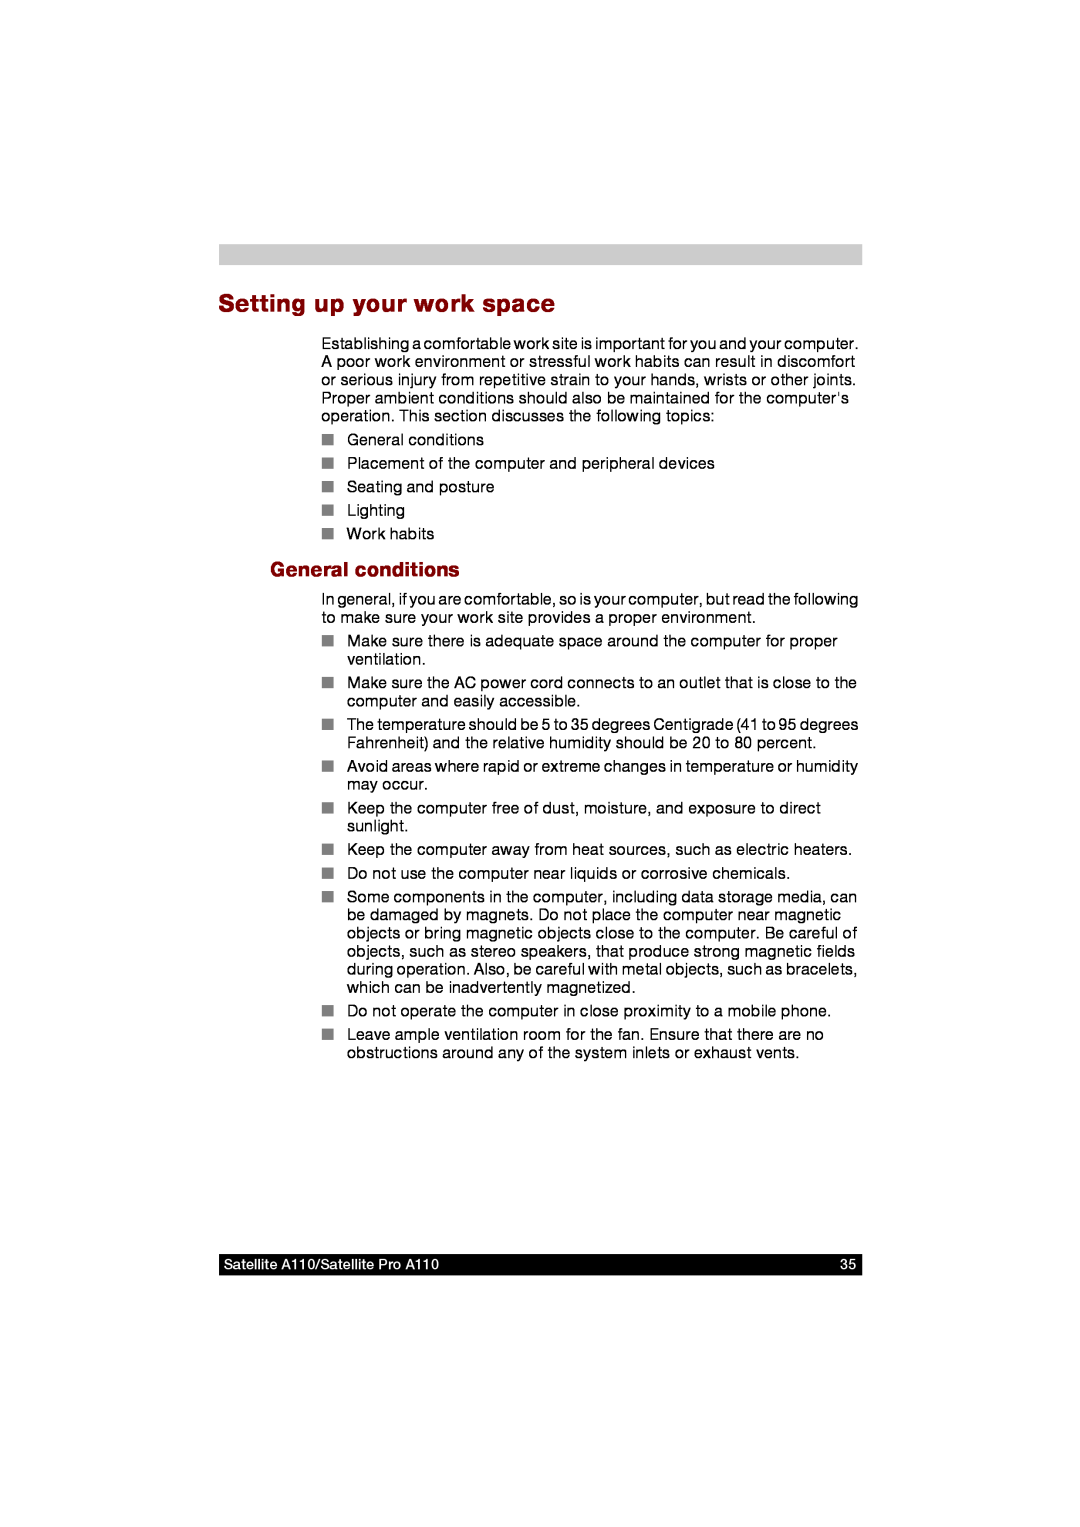 Toshiba A110 user manual Setting up your work space, General conditions 